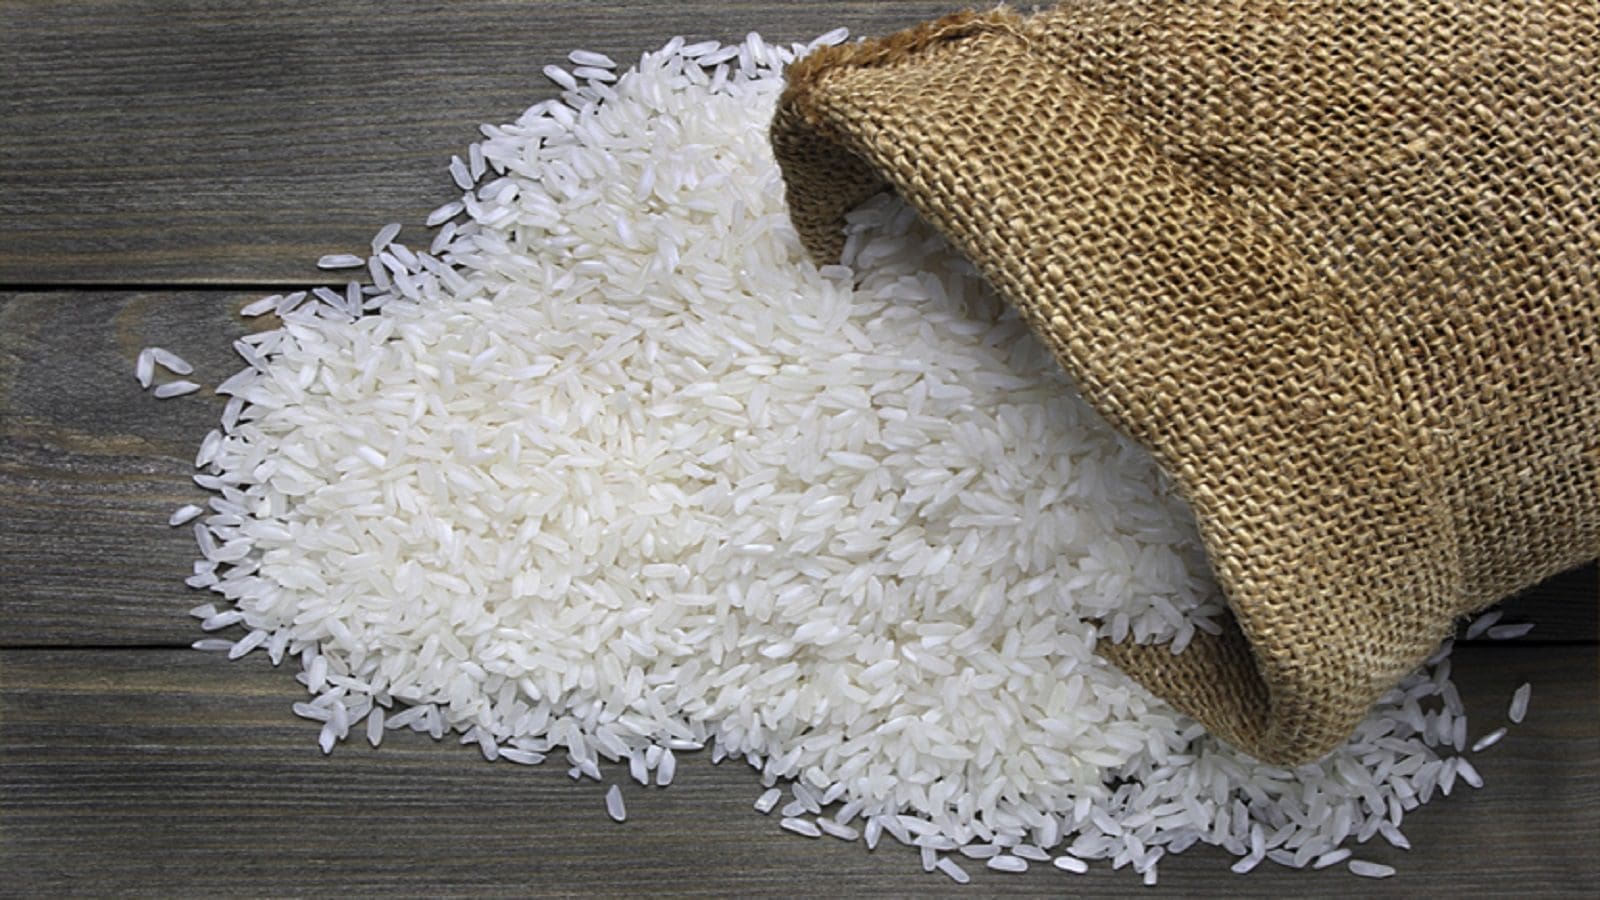 Yanmar’s Sake rice project cultivates European market with local production